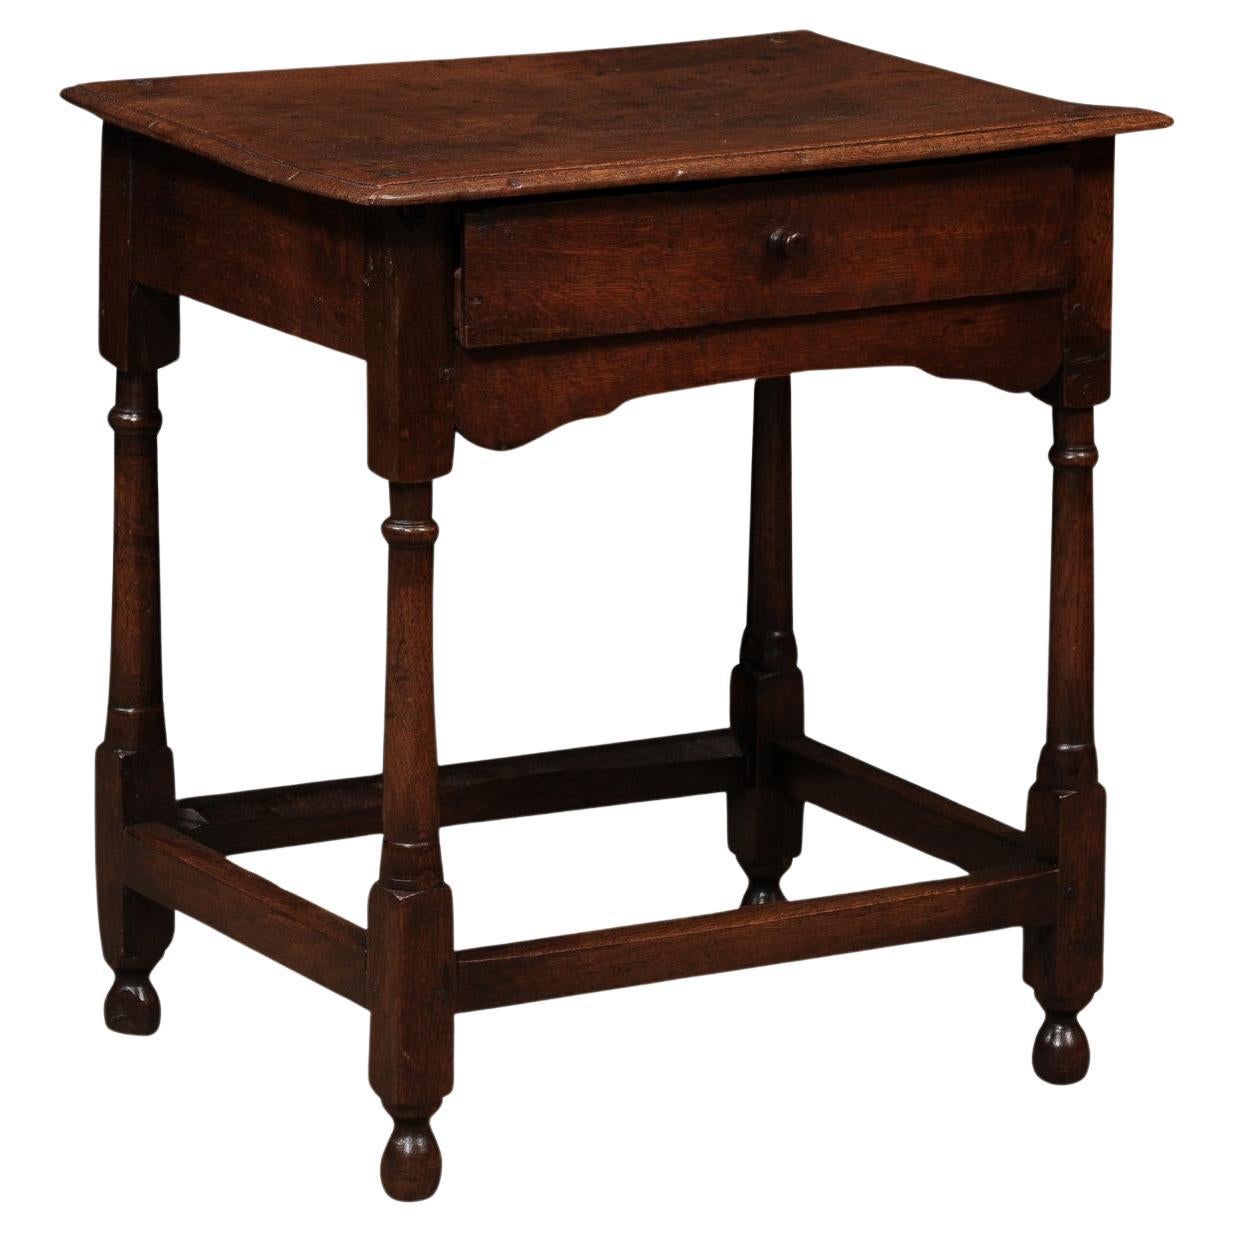 English Small 18th Century Oak Side Table with Drawer, Turned Legs